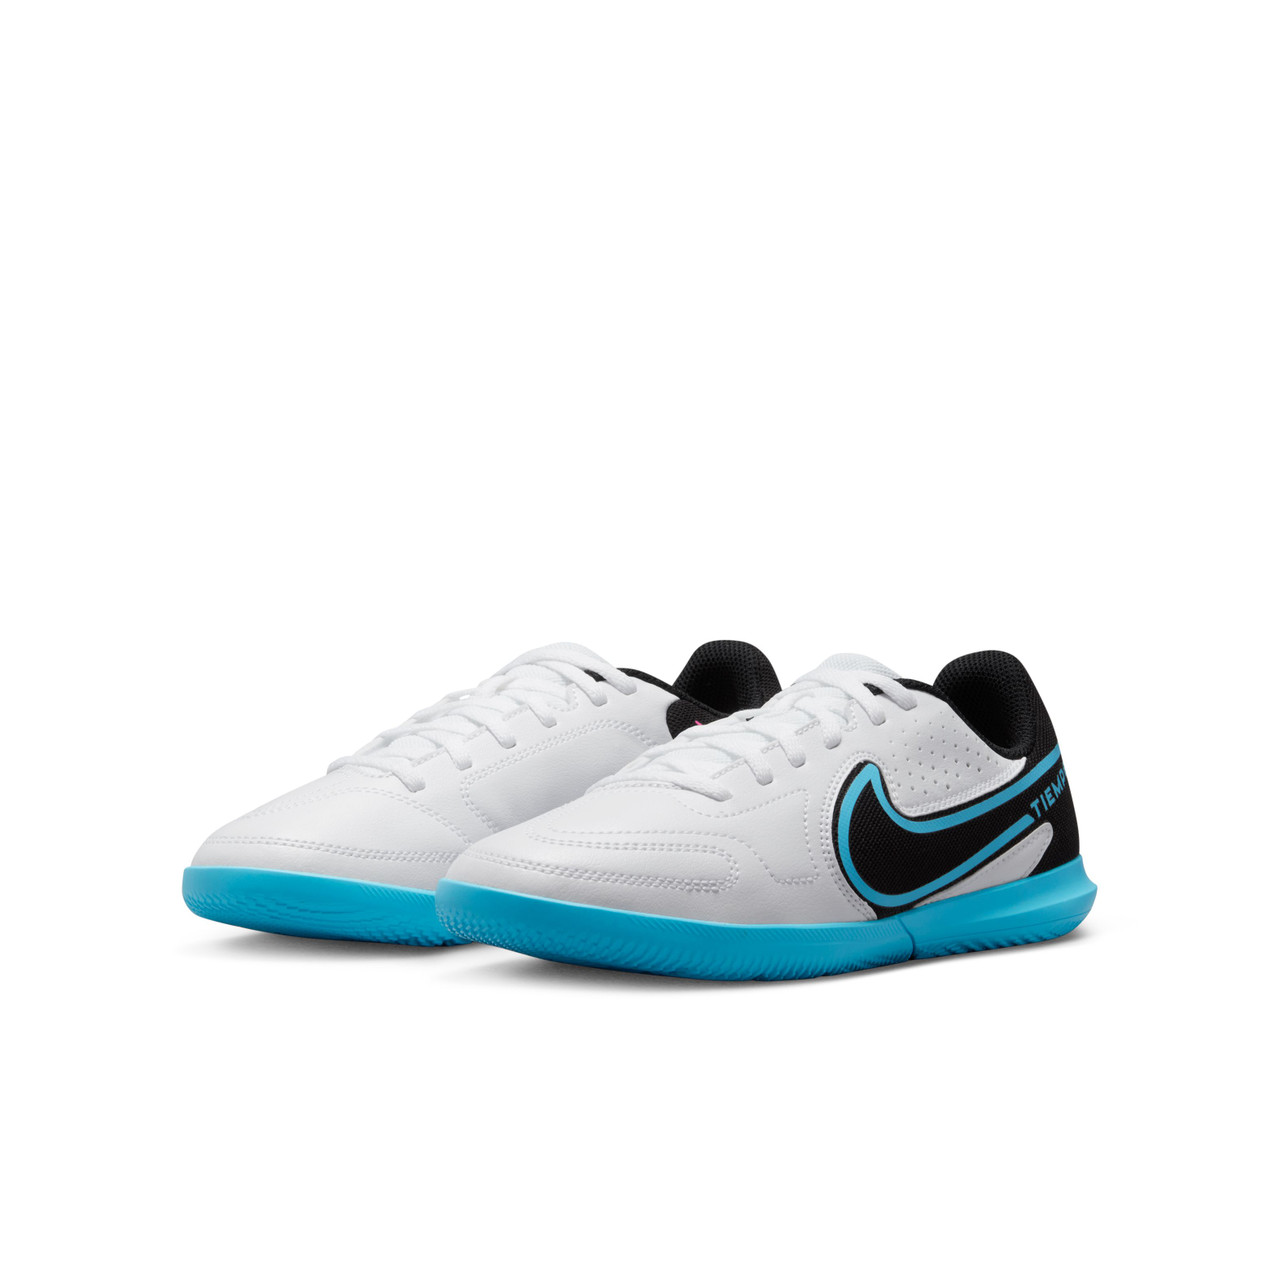 Nike Tiempo 9 Indoor Soccer Shoes youth Version 146-White-Blue - Chicago Soccer